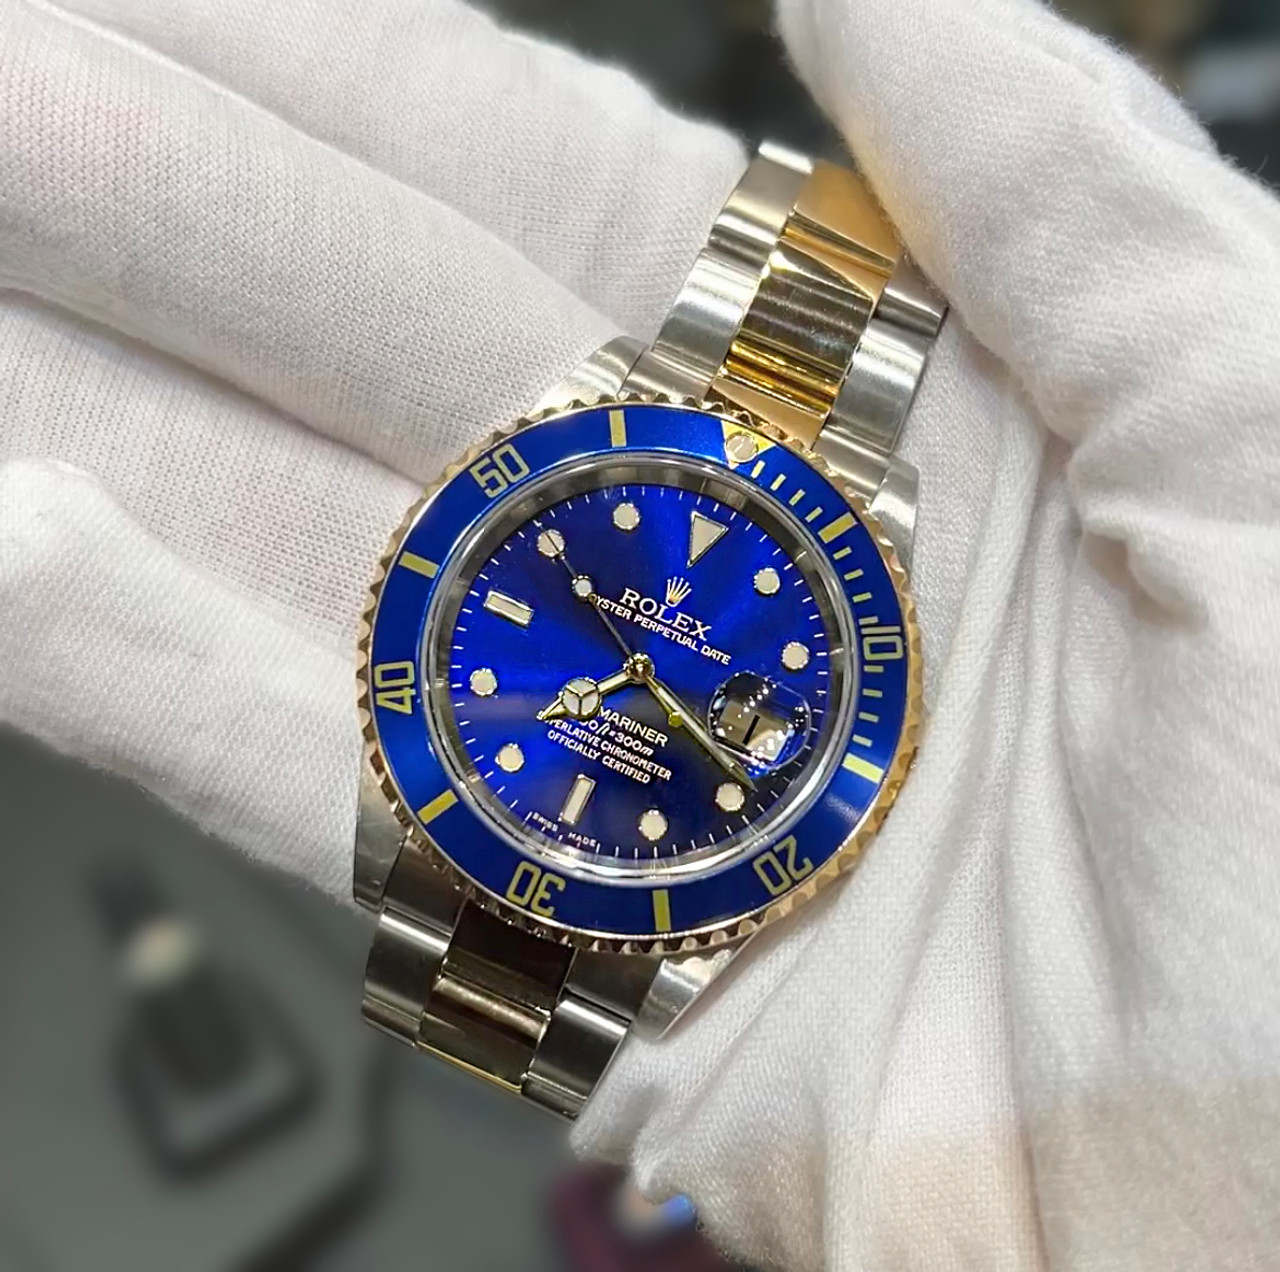 2007 Rolex Submariner Two-Tone with Blue Dial and Bezel, box, papers, and  tags.